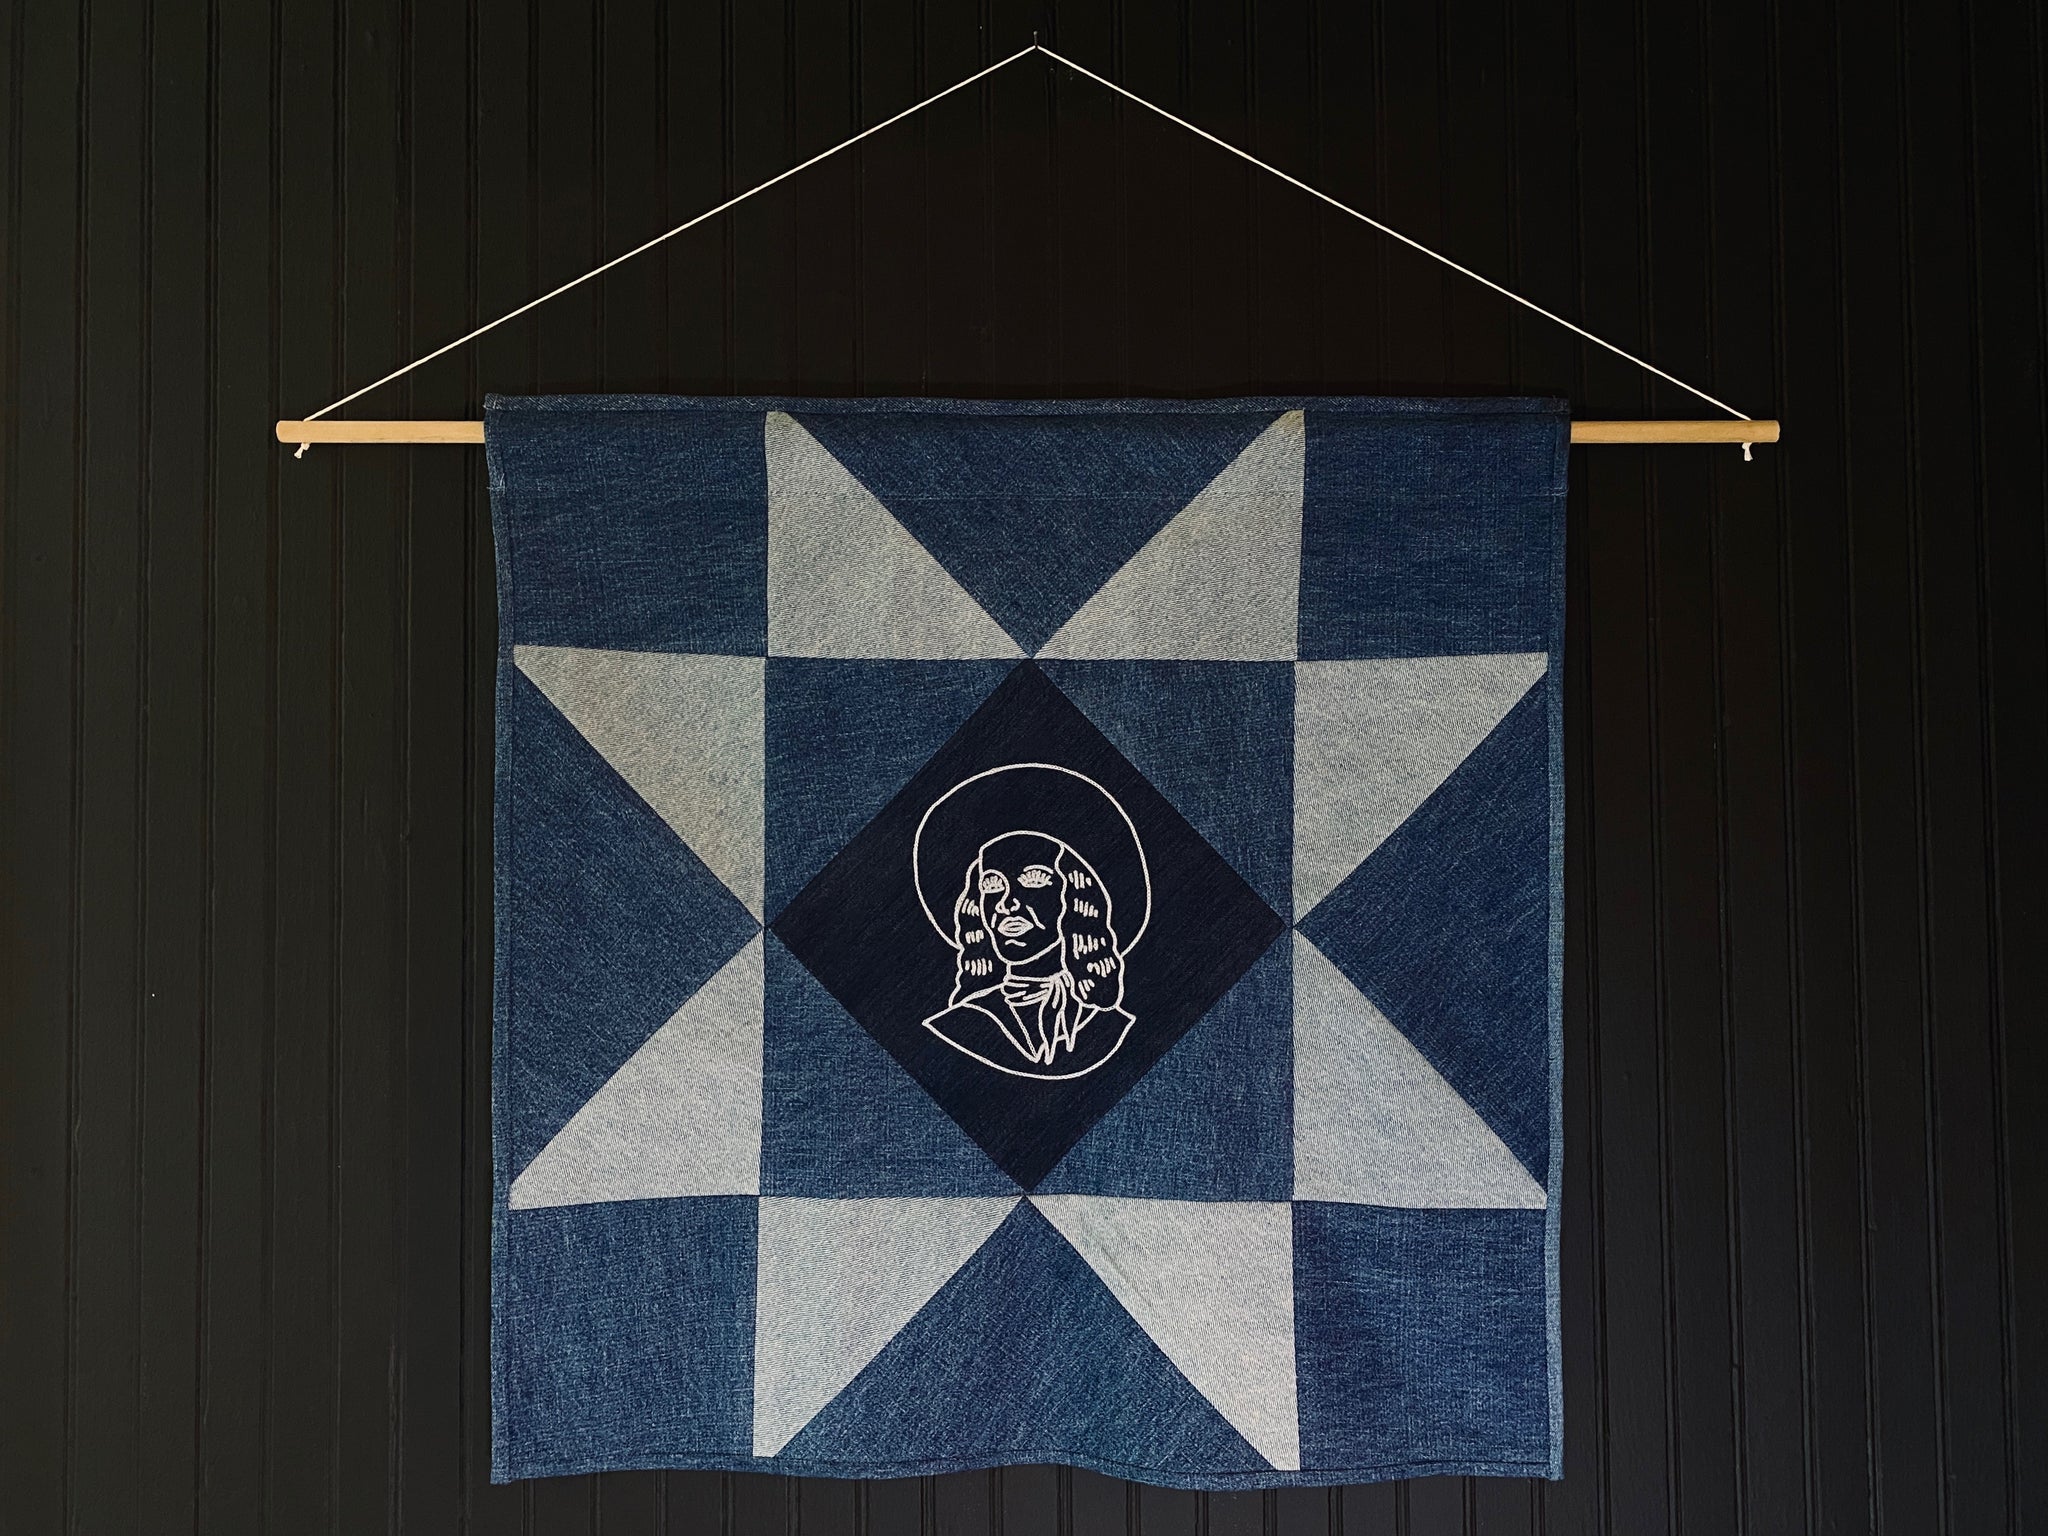 Ft Lonesome Cowboy & Cowgirl Up-cycled Denim Patch Banners